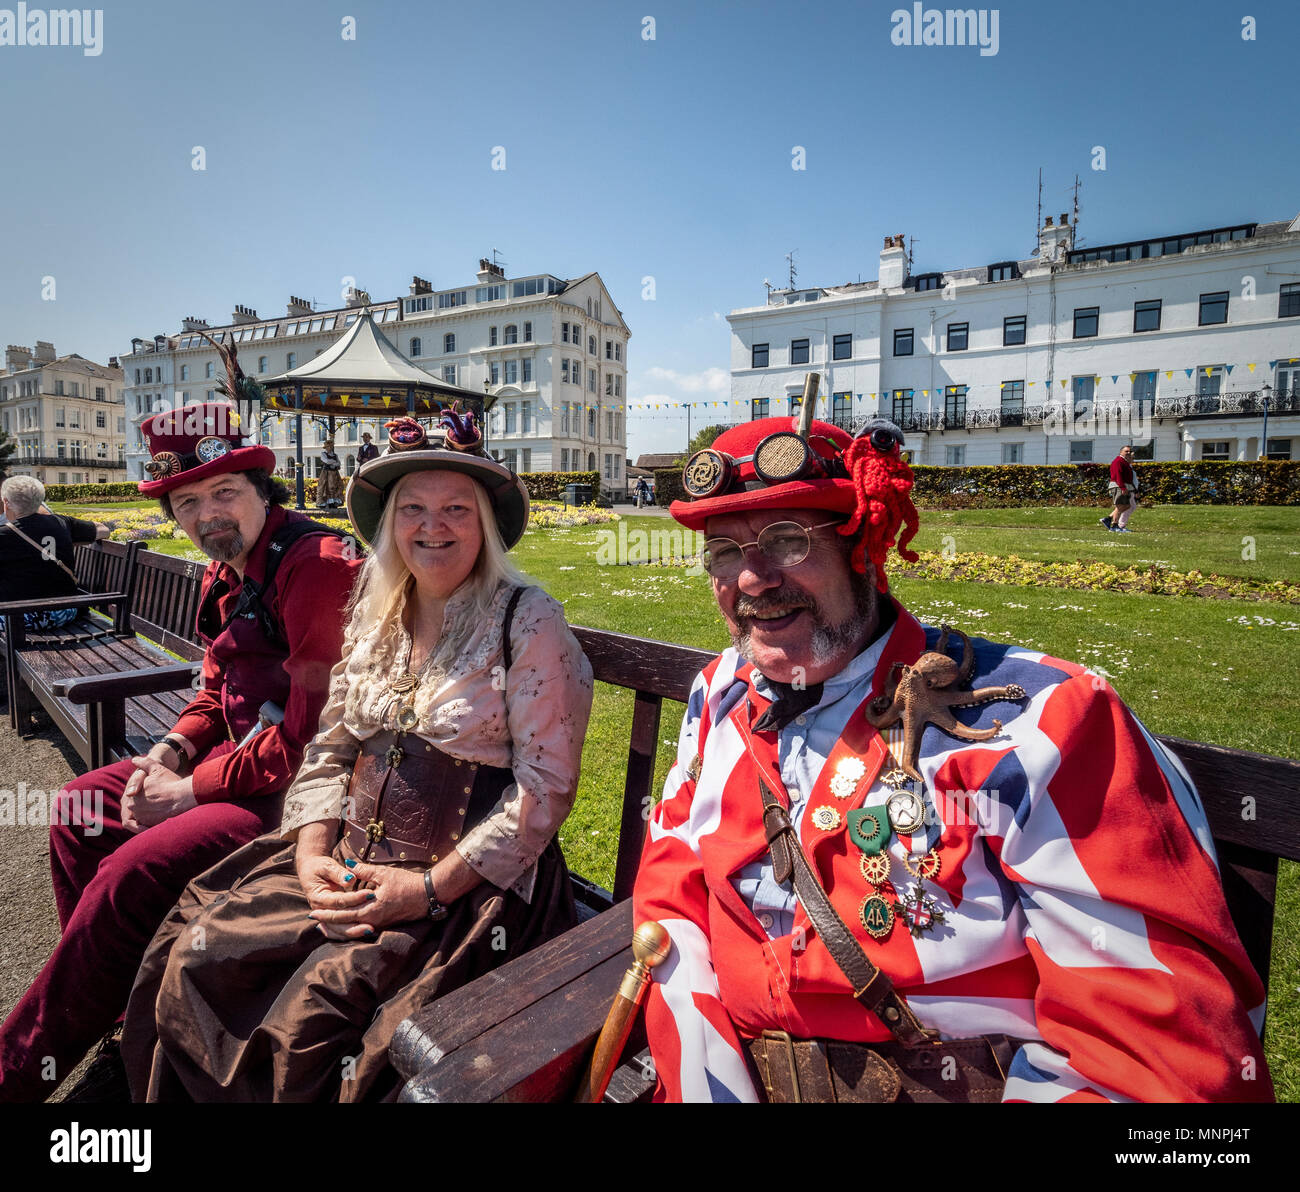 Filey, UK. 19th May, 2018. Many costumes incorporate Union Jack designs during the 2nd annual Filey Steampunk weekend as a nod towards the Royal Wedding. The steampunk fan weekend has returned for a second year and is attracting Steampunk fans from all over the UK. Photo Bailey-Cooper Photography/Alamy Live News Stock Photo